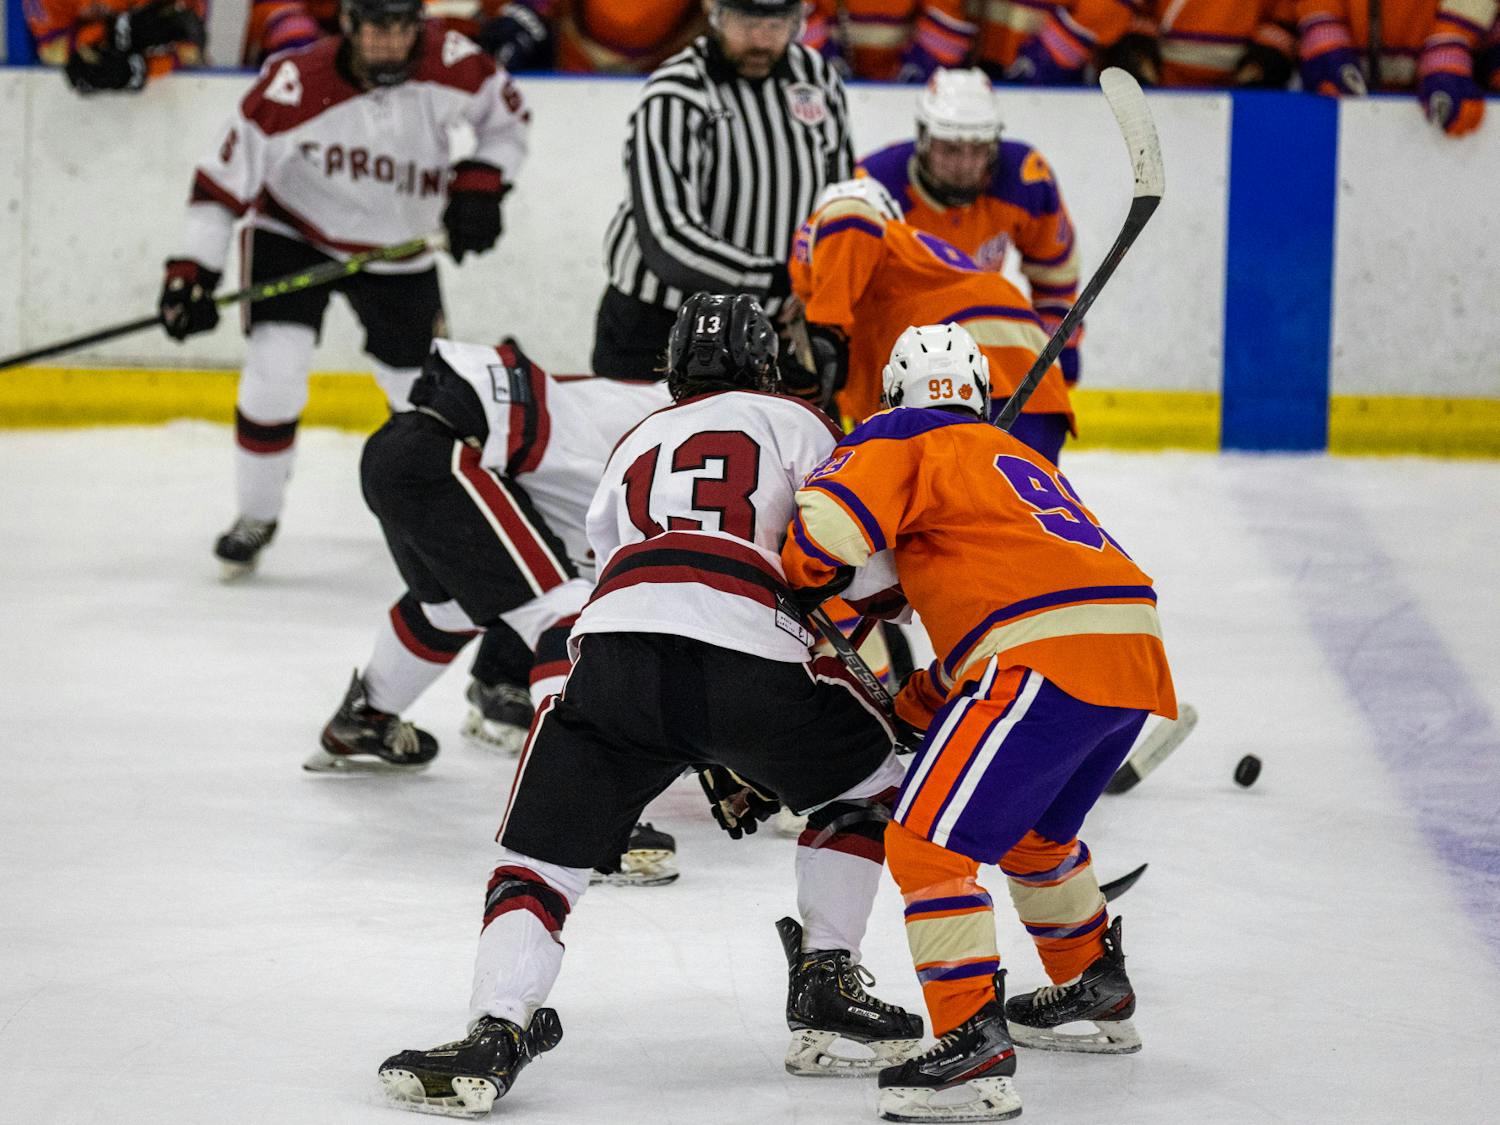 Senior center Owen Thomas battles against a Clemson opponent for the puck during a game against the Tigers on Nov. 11, 2022. South Carolina defeated Clemson 5-4 in an intense back and forth matchup.